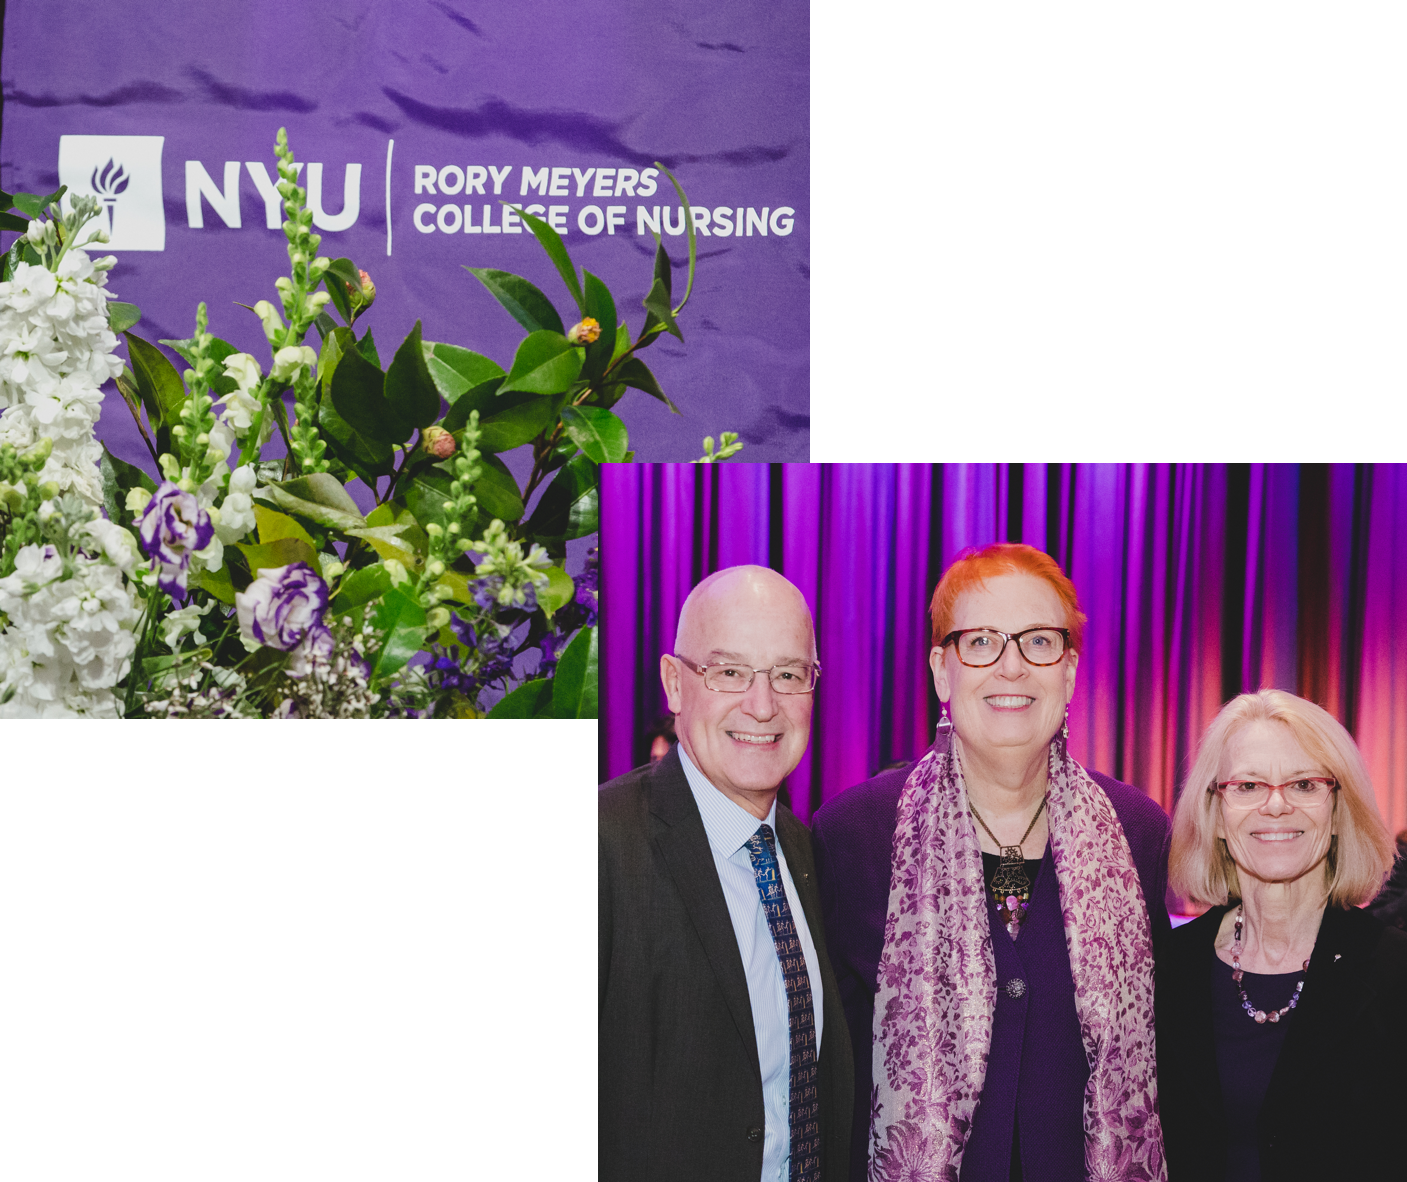 Dean Eileen with President Hamilton and a guest at the event